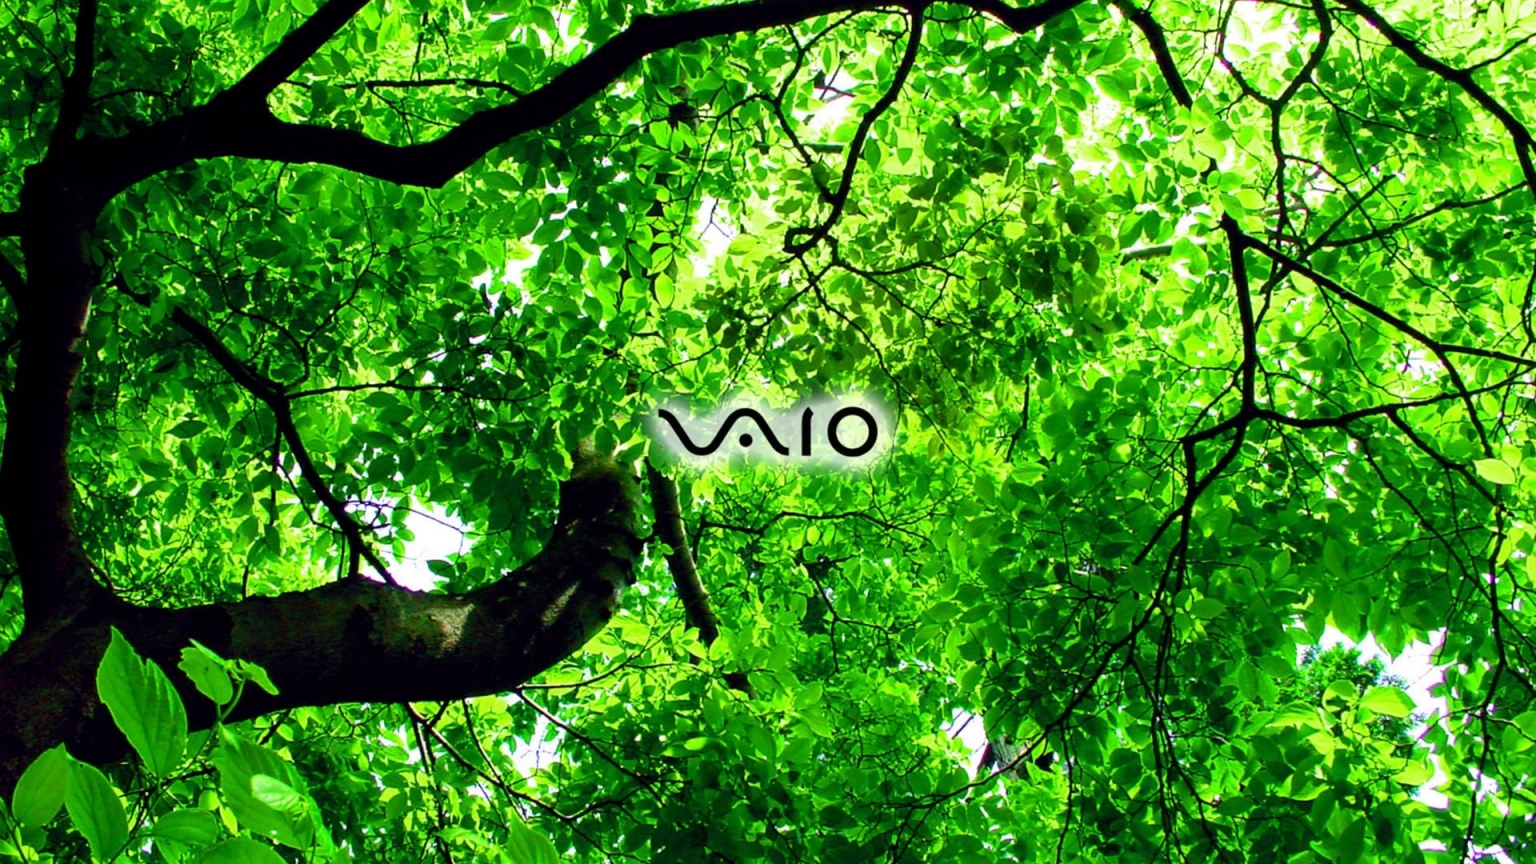 Sony Vaio green for 1536 x 864 HDTV resolution